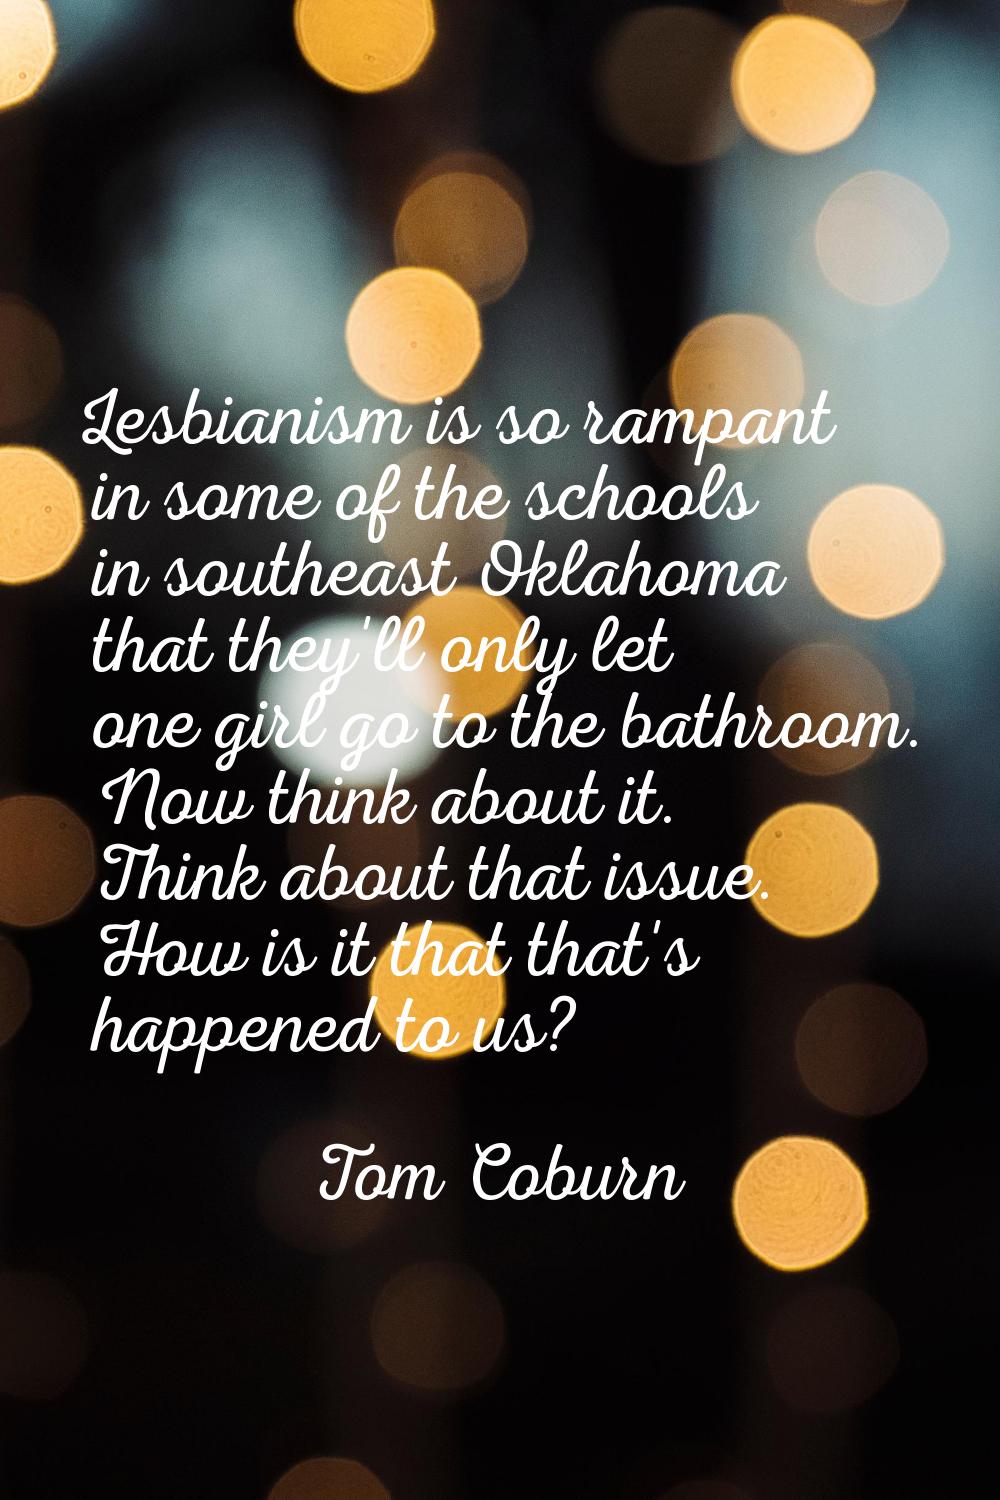 Lesbianism is so rampant in some of the schools in southeast Oklahoma that they'll only let one gir